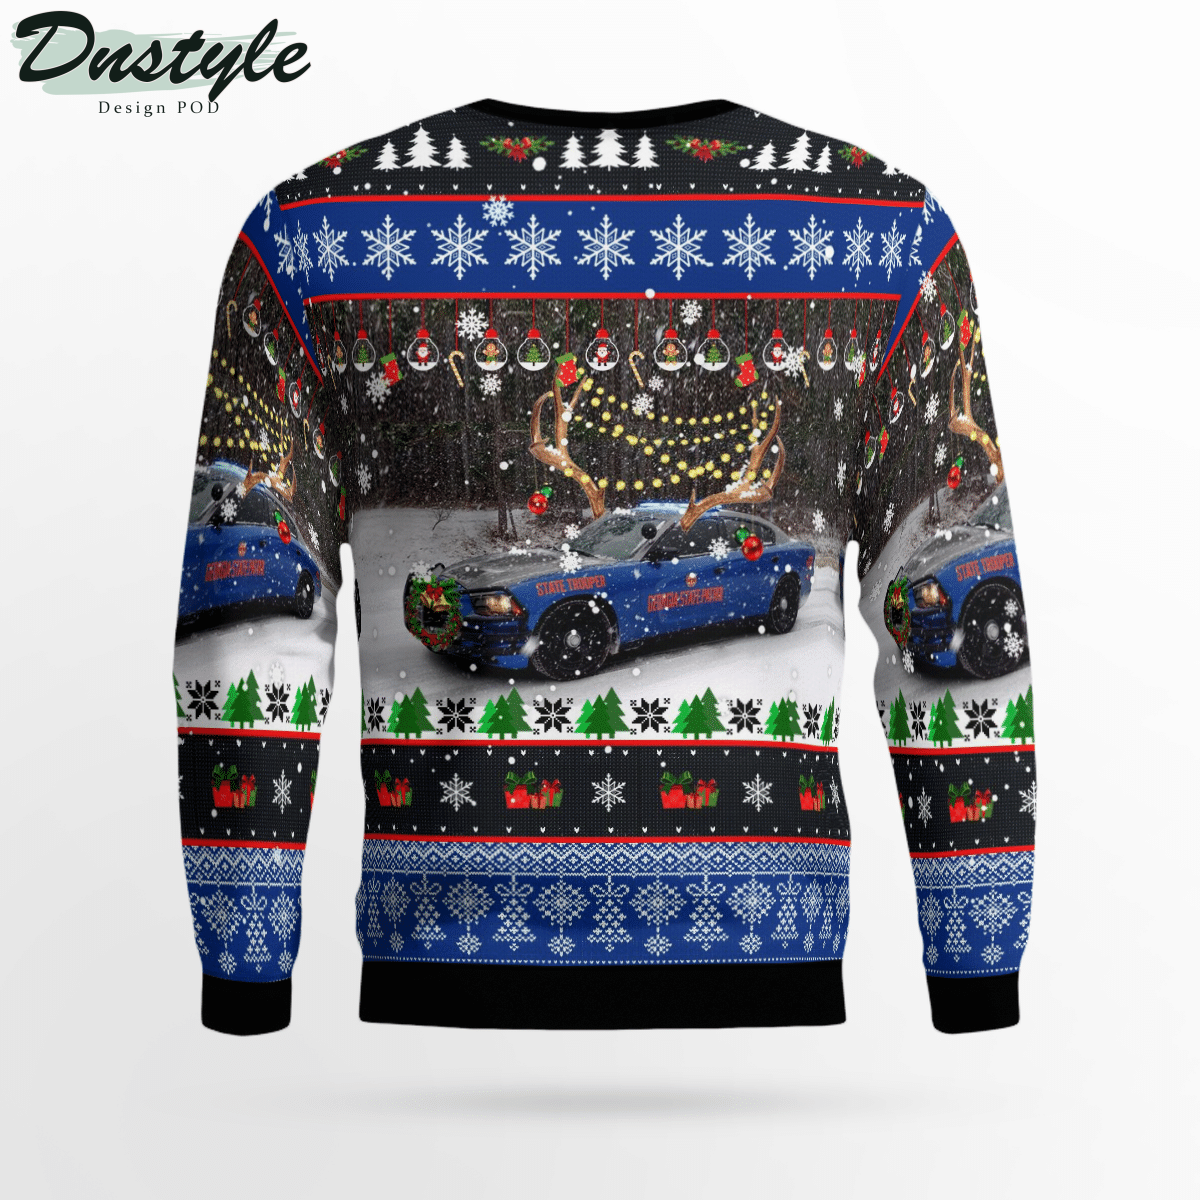 Georgia State Patrol Blue Charger Pursuit Ugly Christmas Sweater